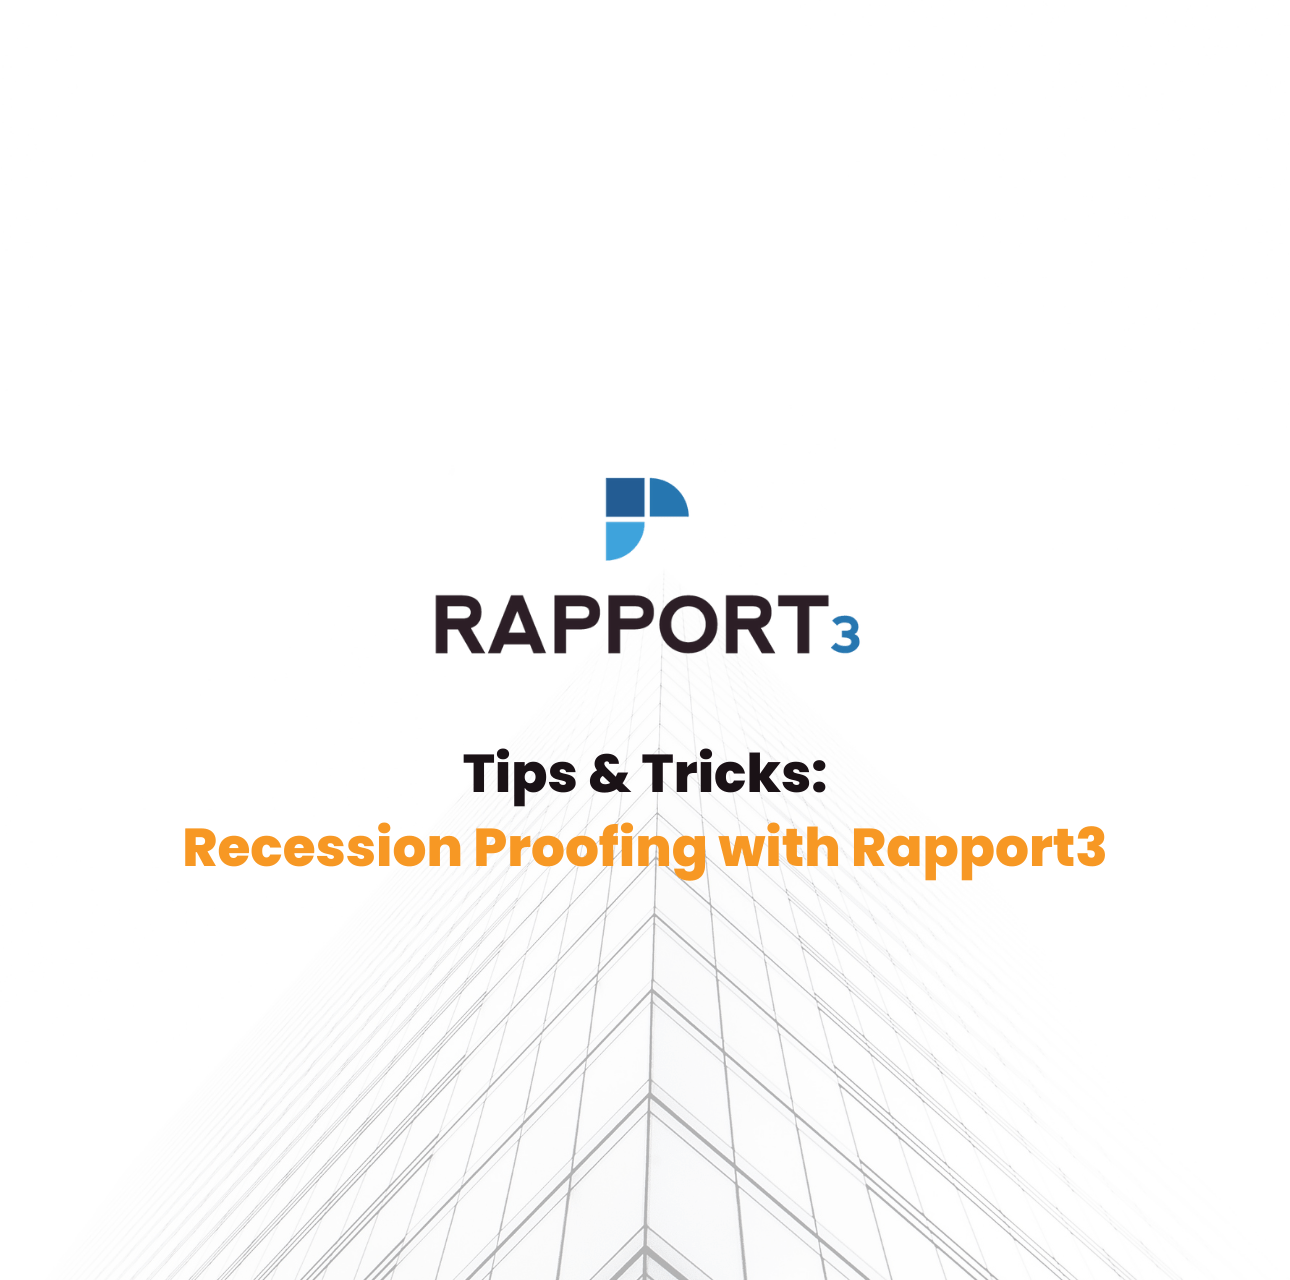 Recession Proofing with Rapport3